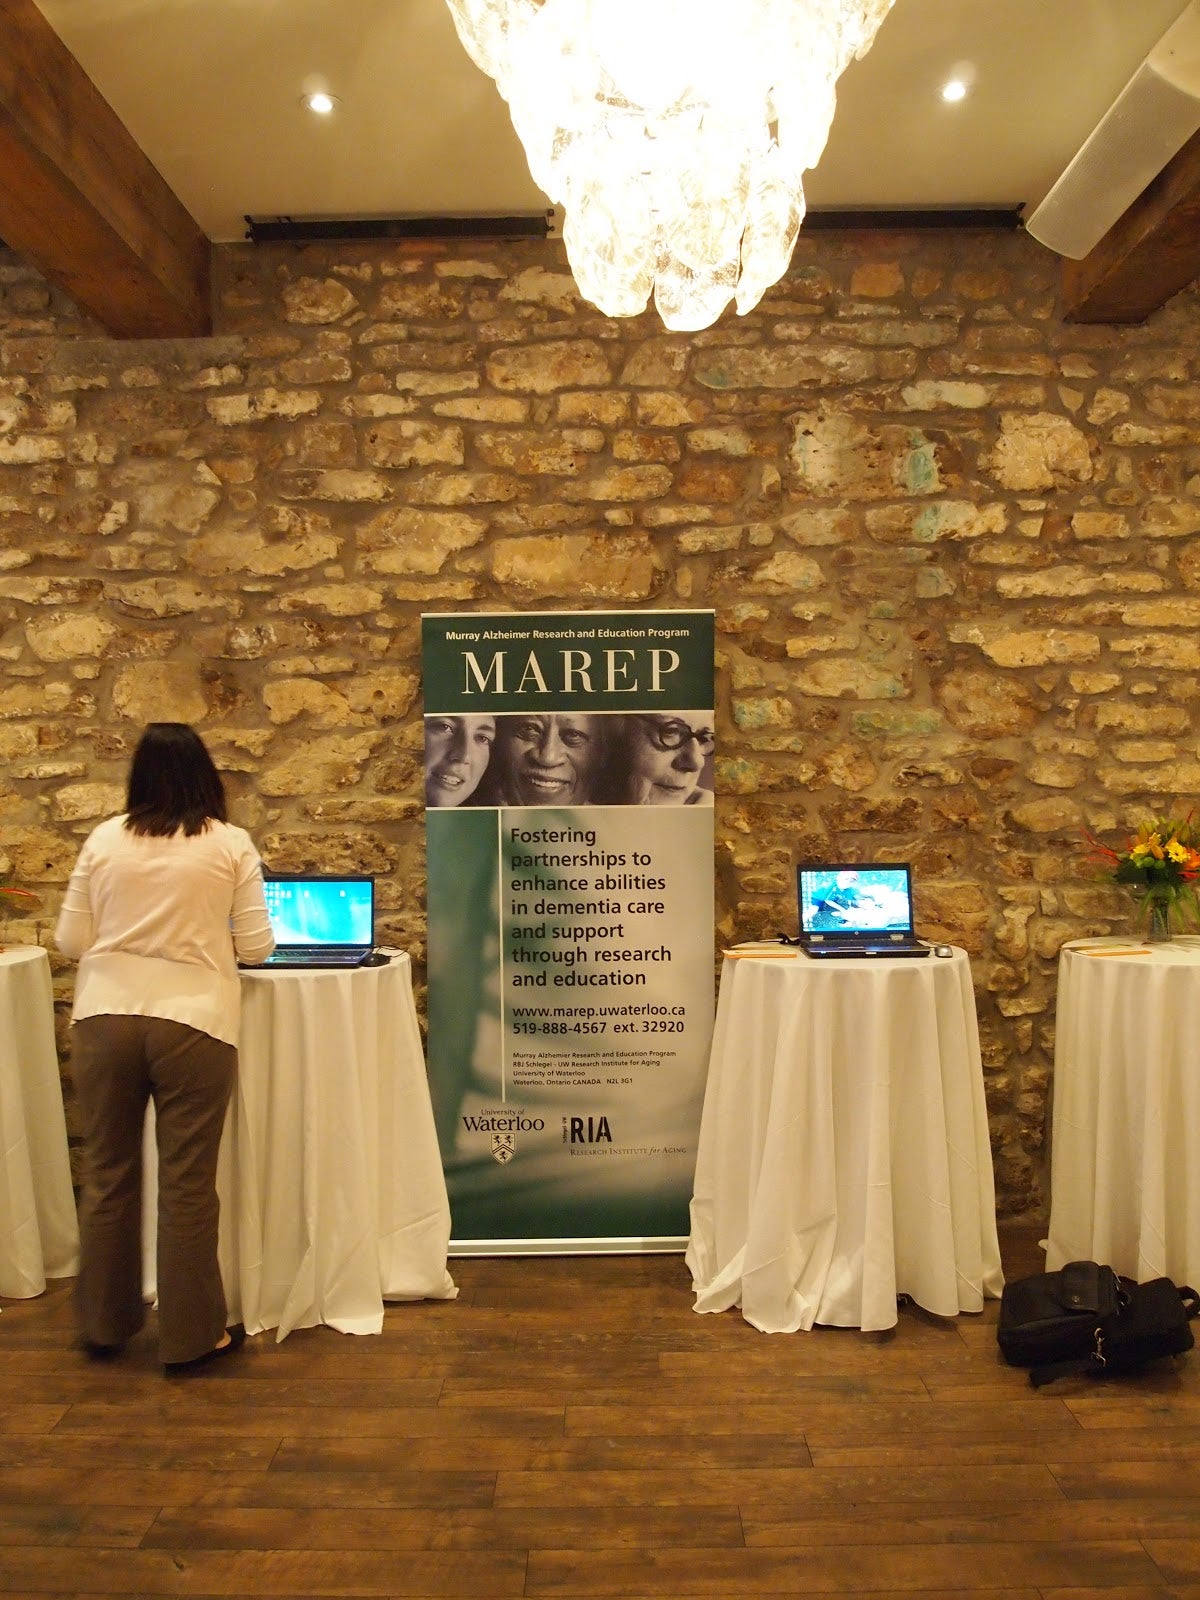 Computer Stations set up so that attendees could browse the site.